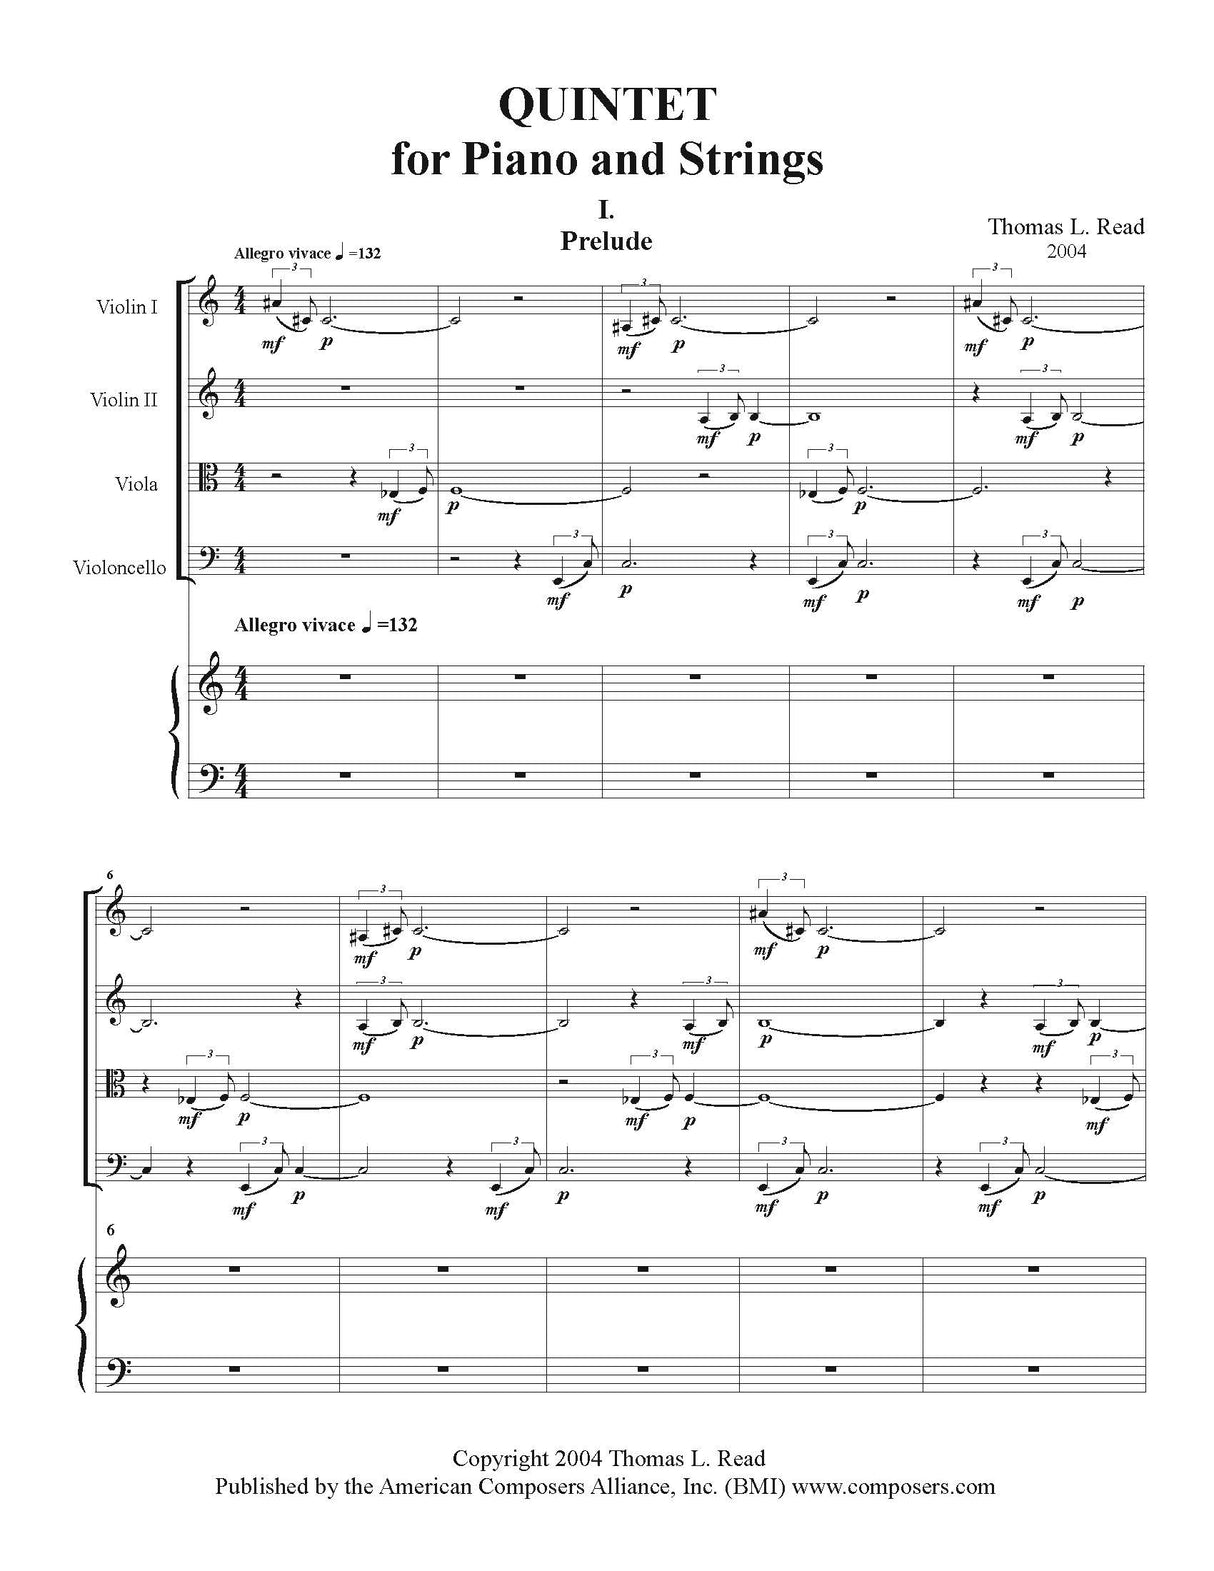 Read: Quintet for Piano and Strings